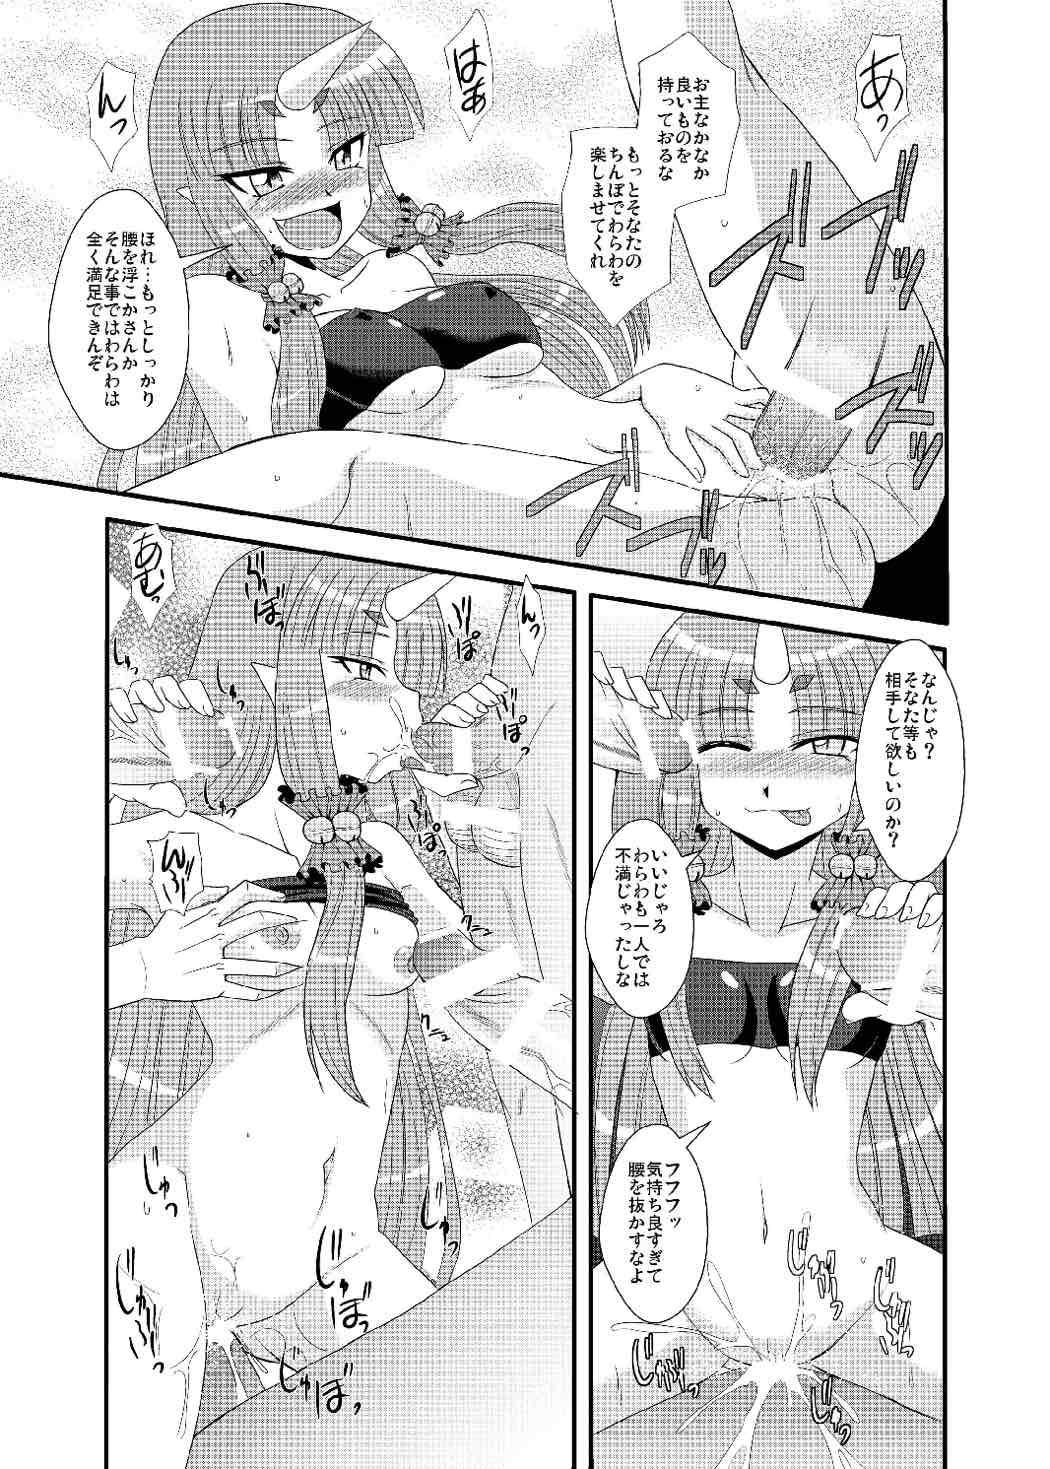 Oldvsyoung Ore no Frontier EX - Super robot wars Exposed - Page 12